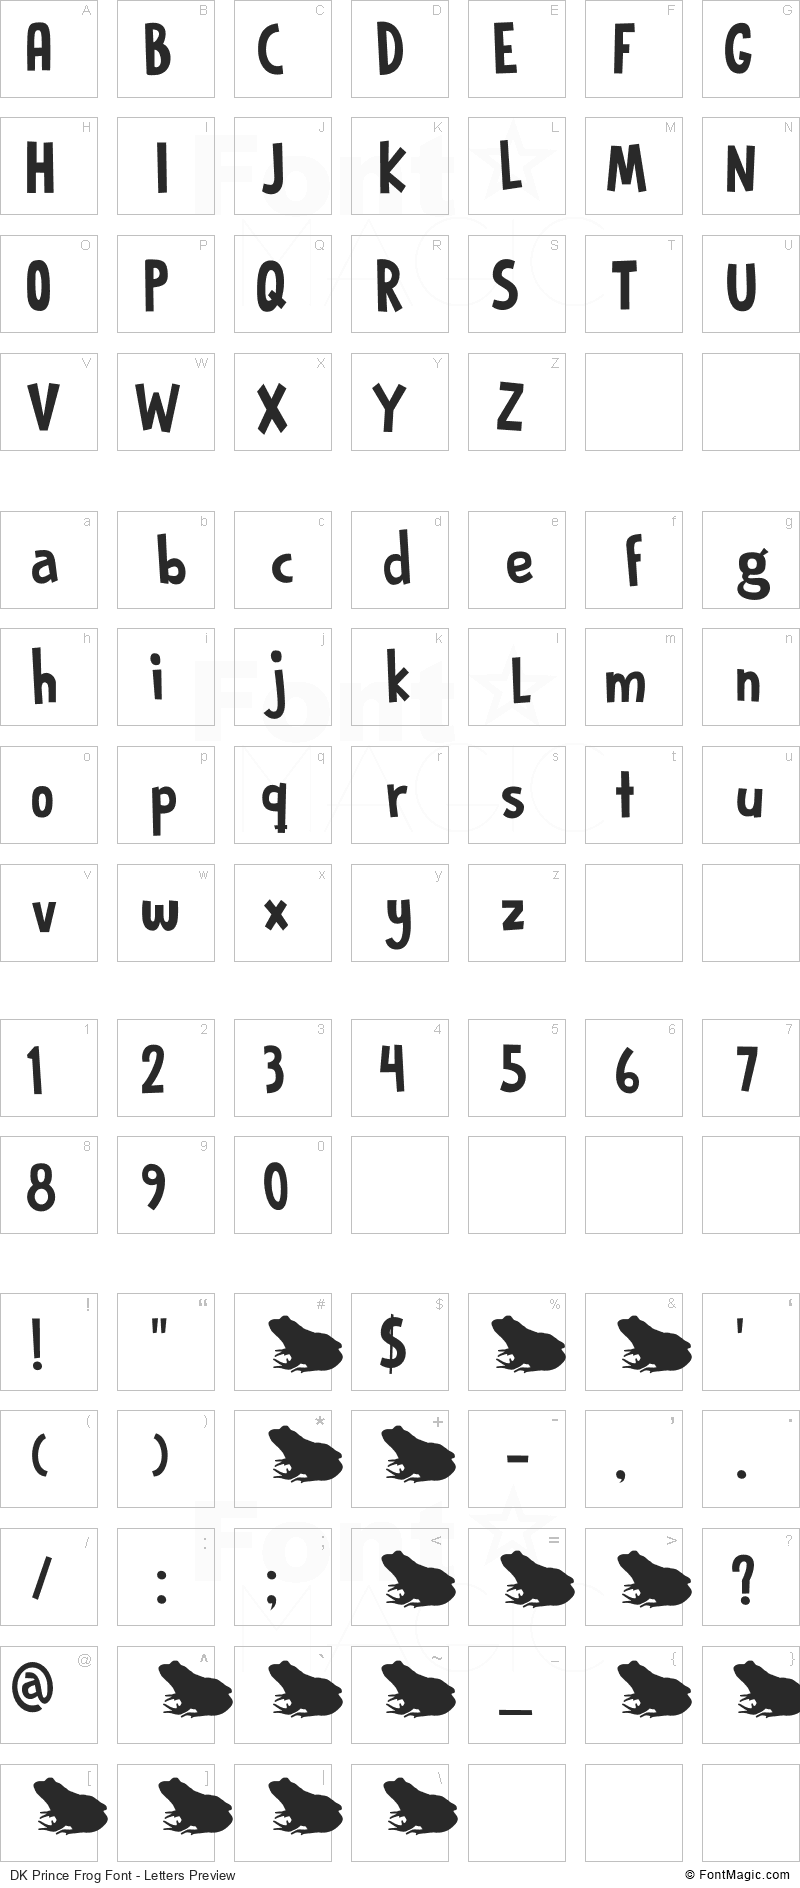 DK Prince Frog Font - All Latters Preview Chart